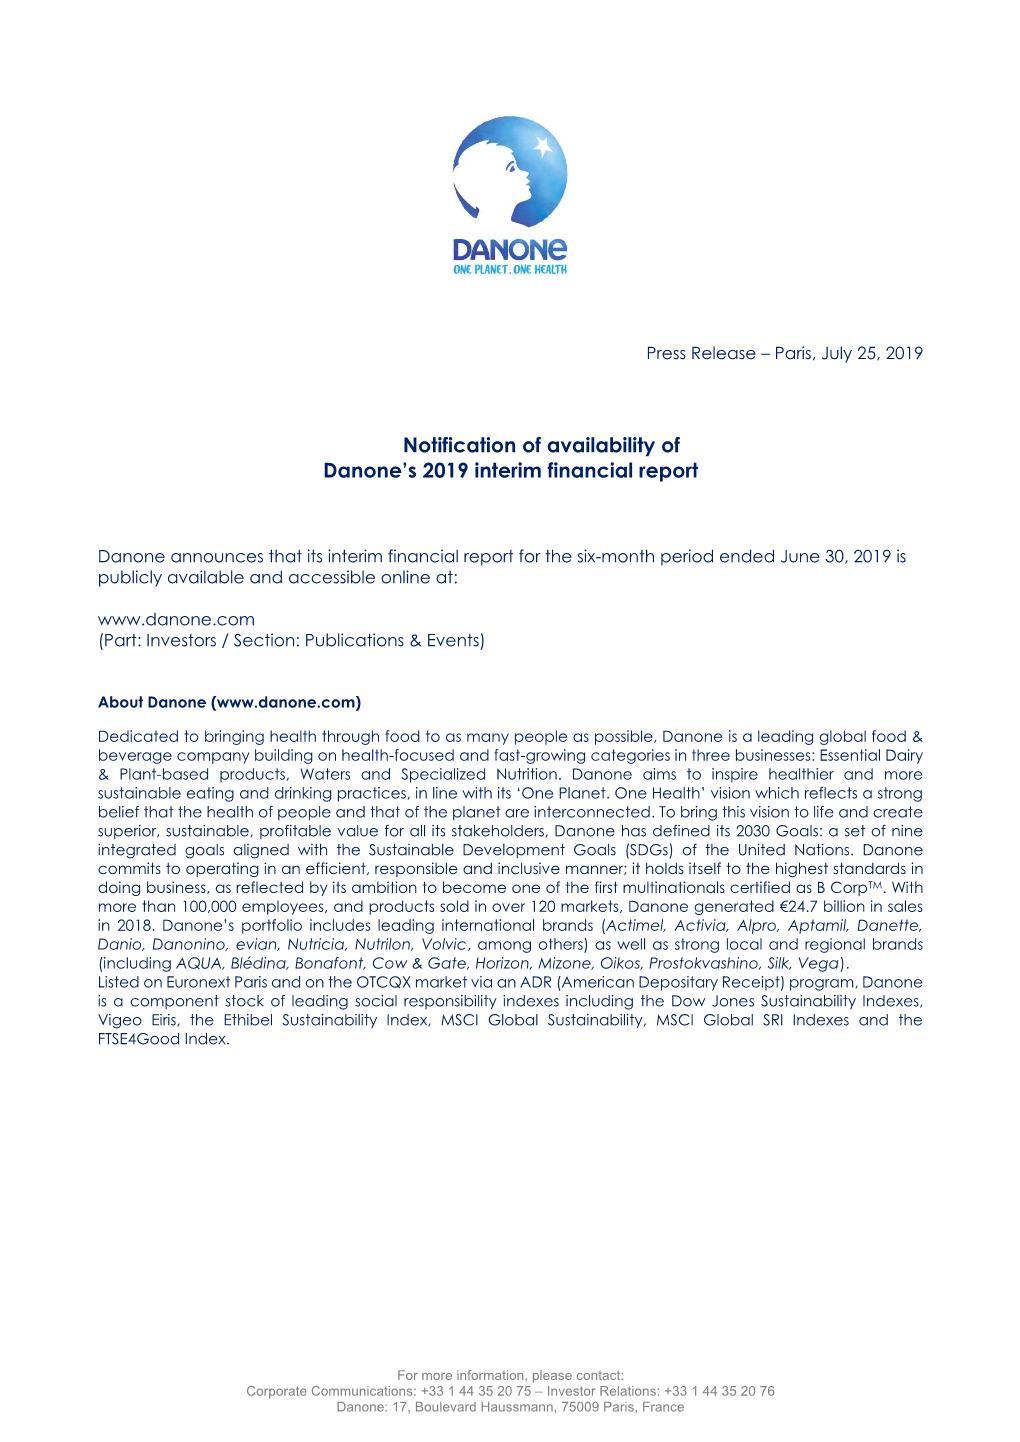 Notification of Availability of Danone's 2019 Interim Financial Report